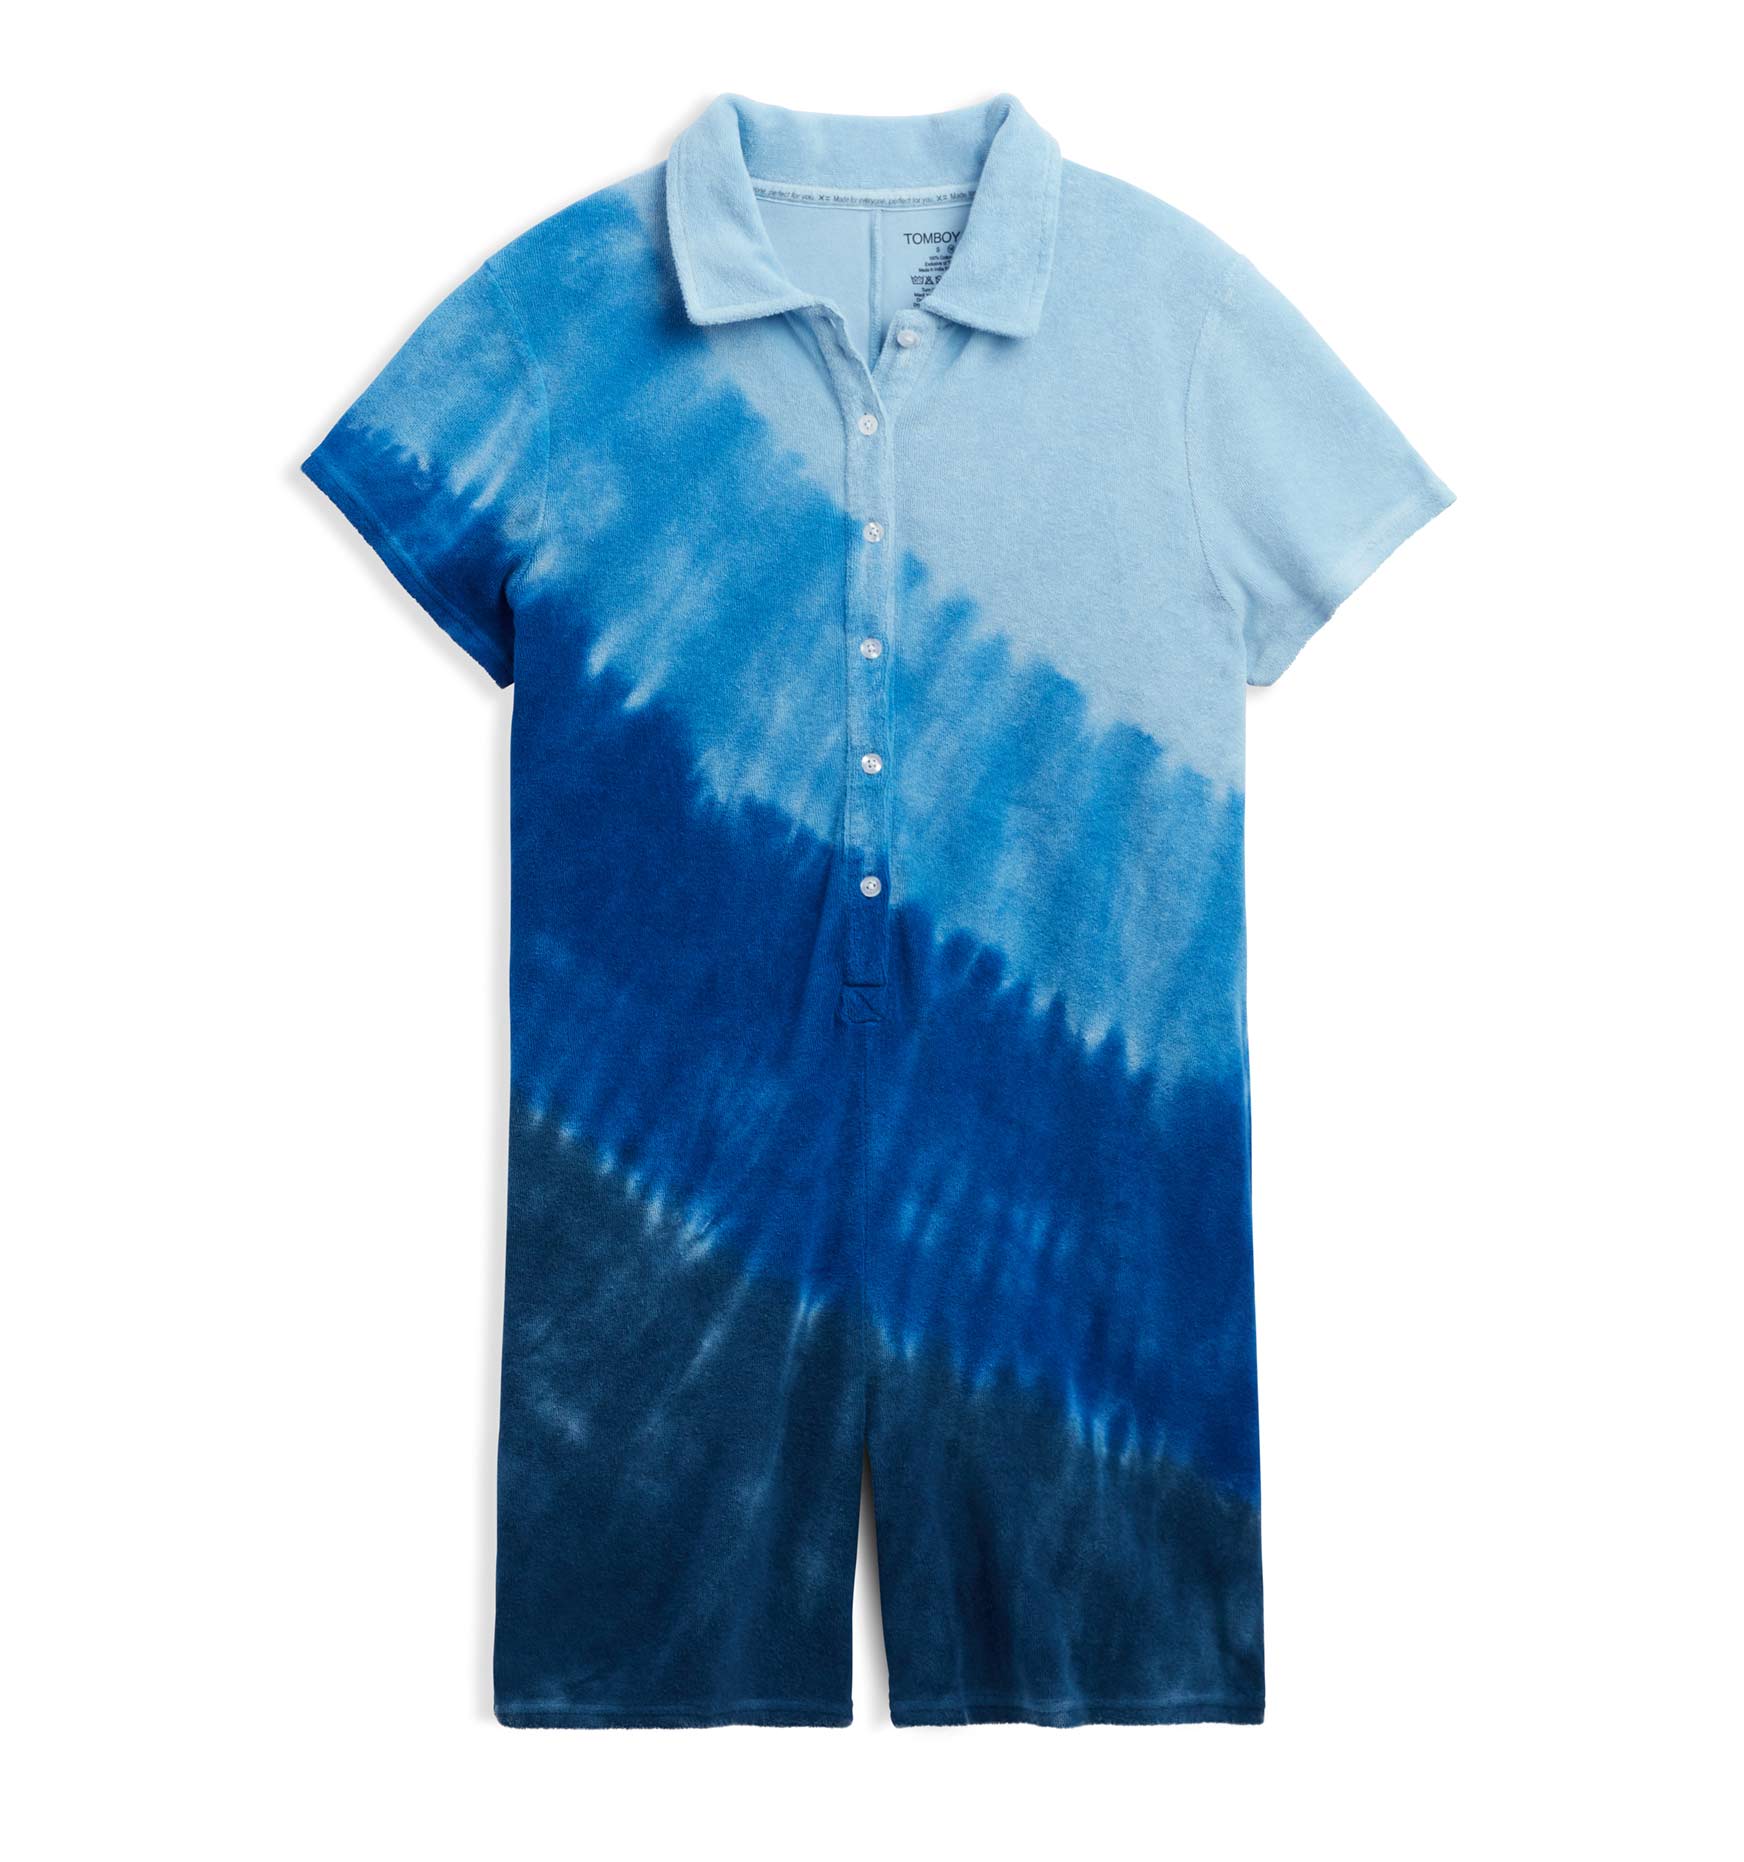 Image of Terry Playsuit - Blue Tie Dye